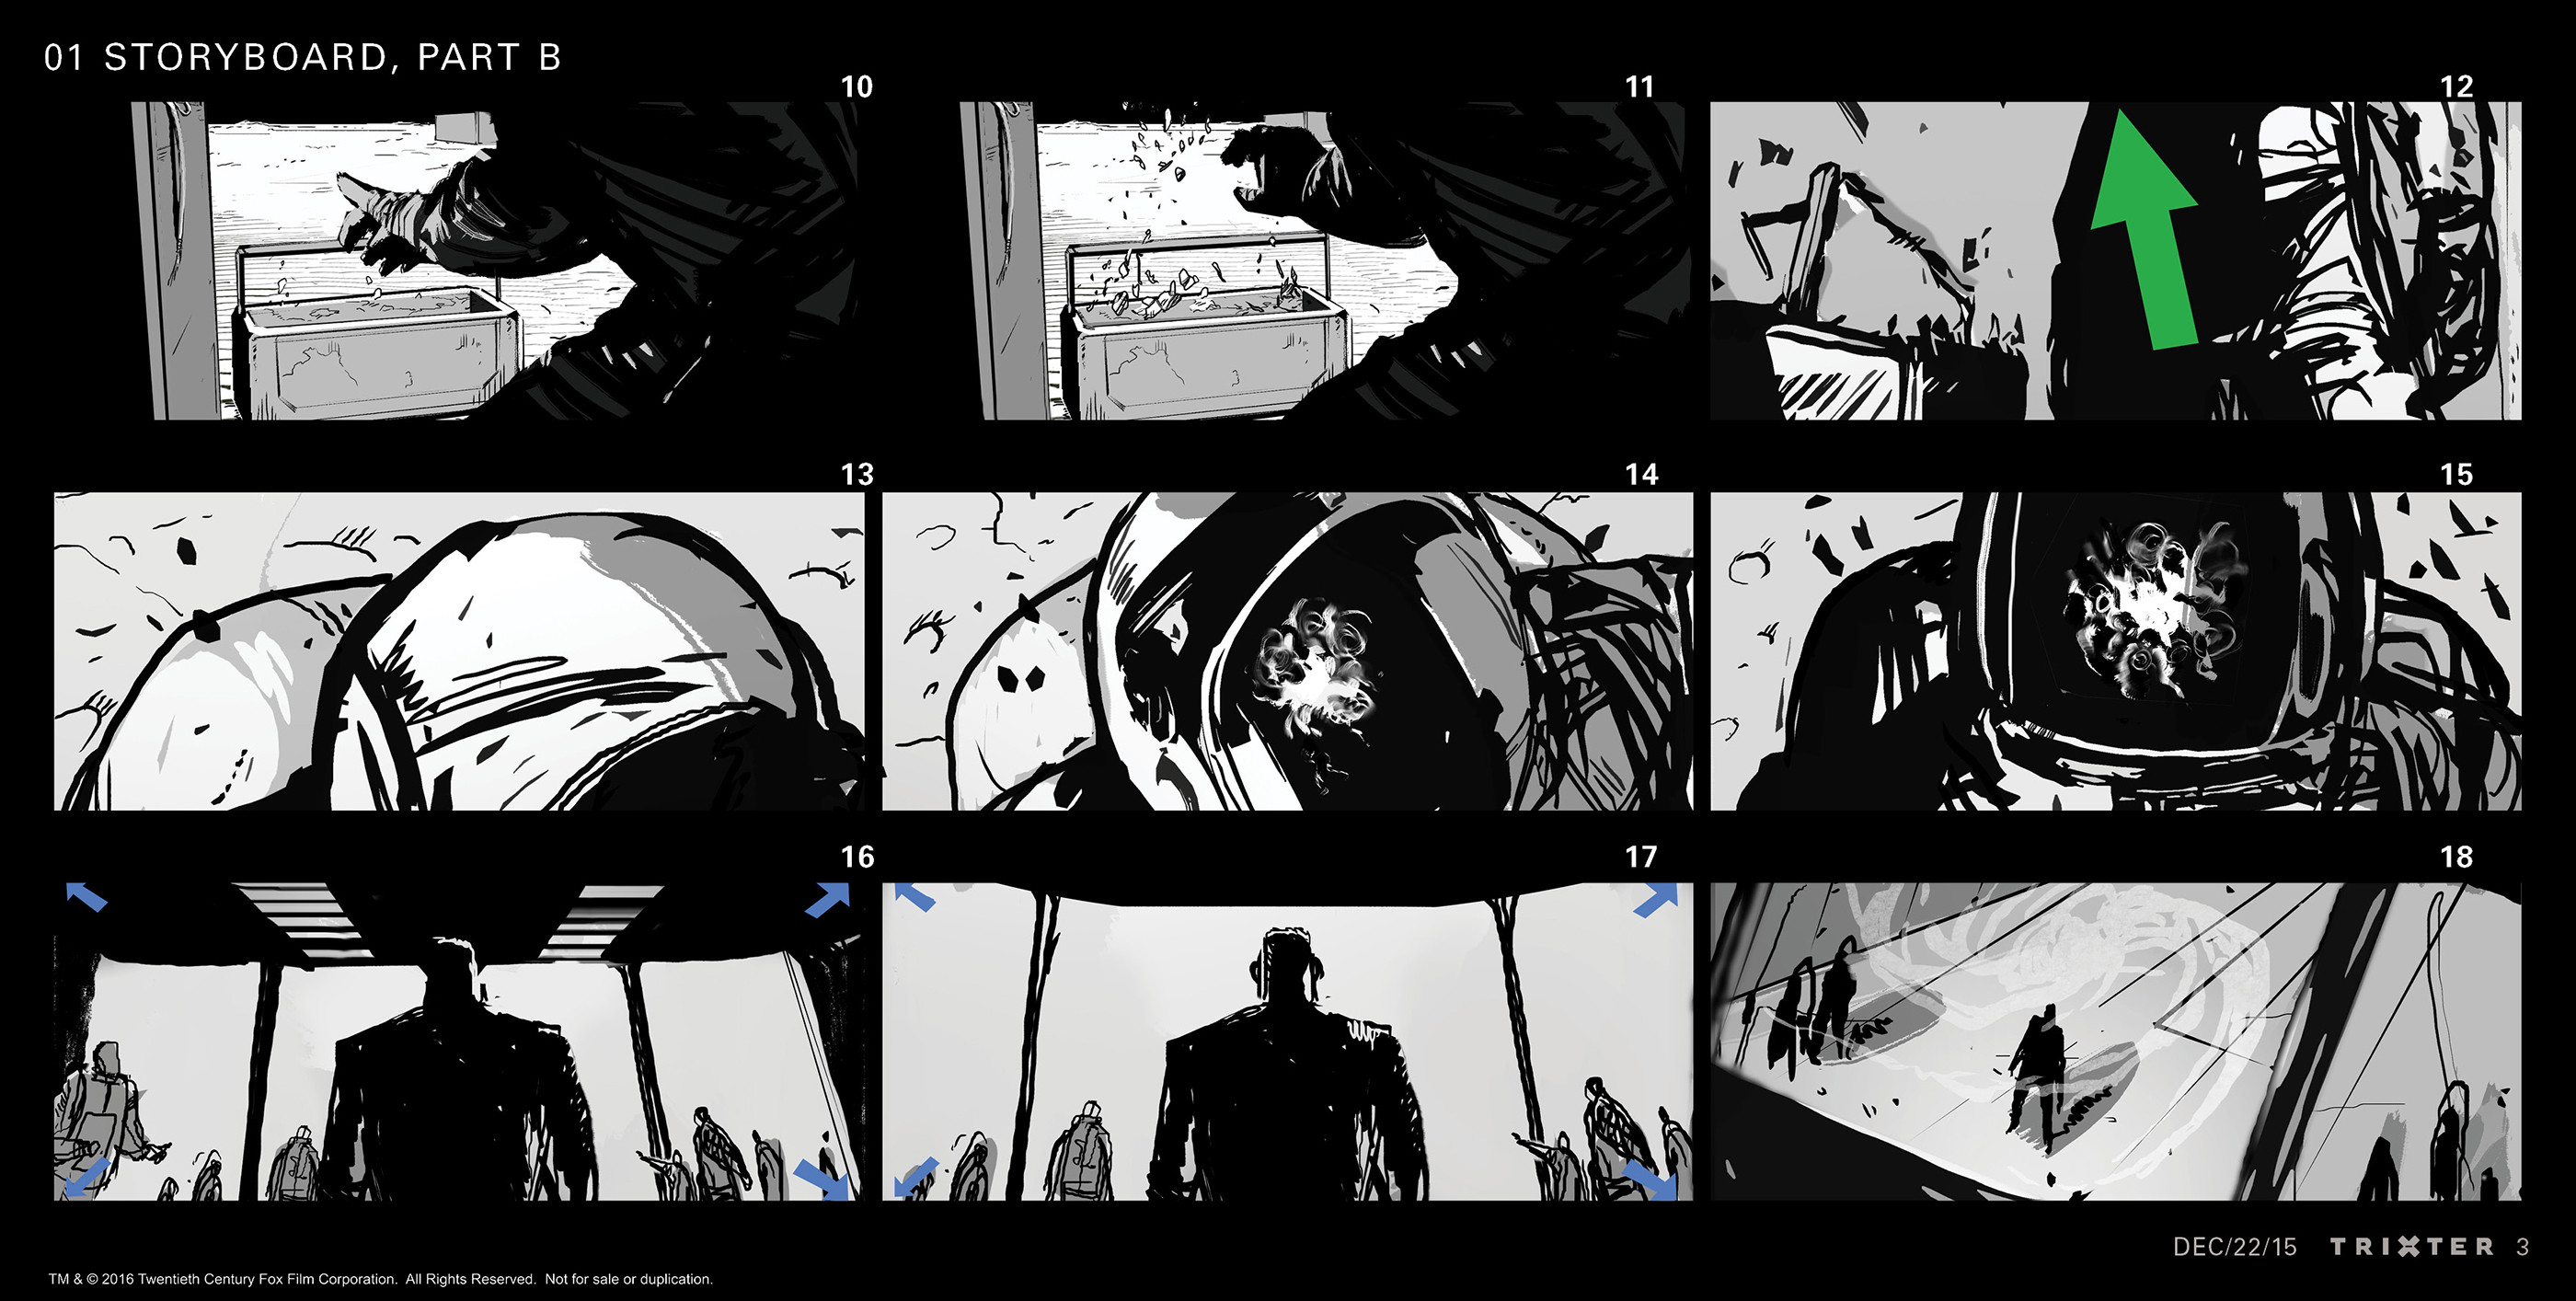 Sequence storyboard: Part 2 of 5